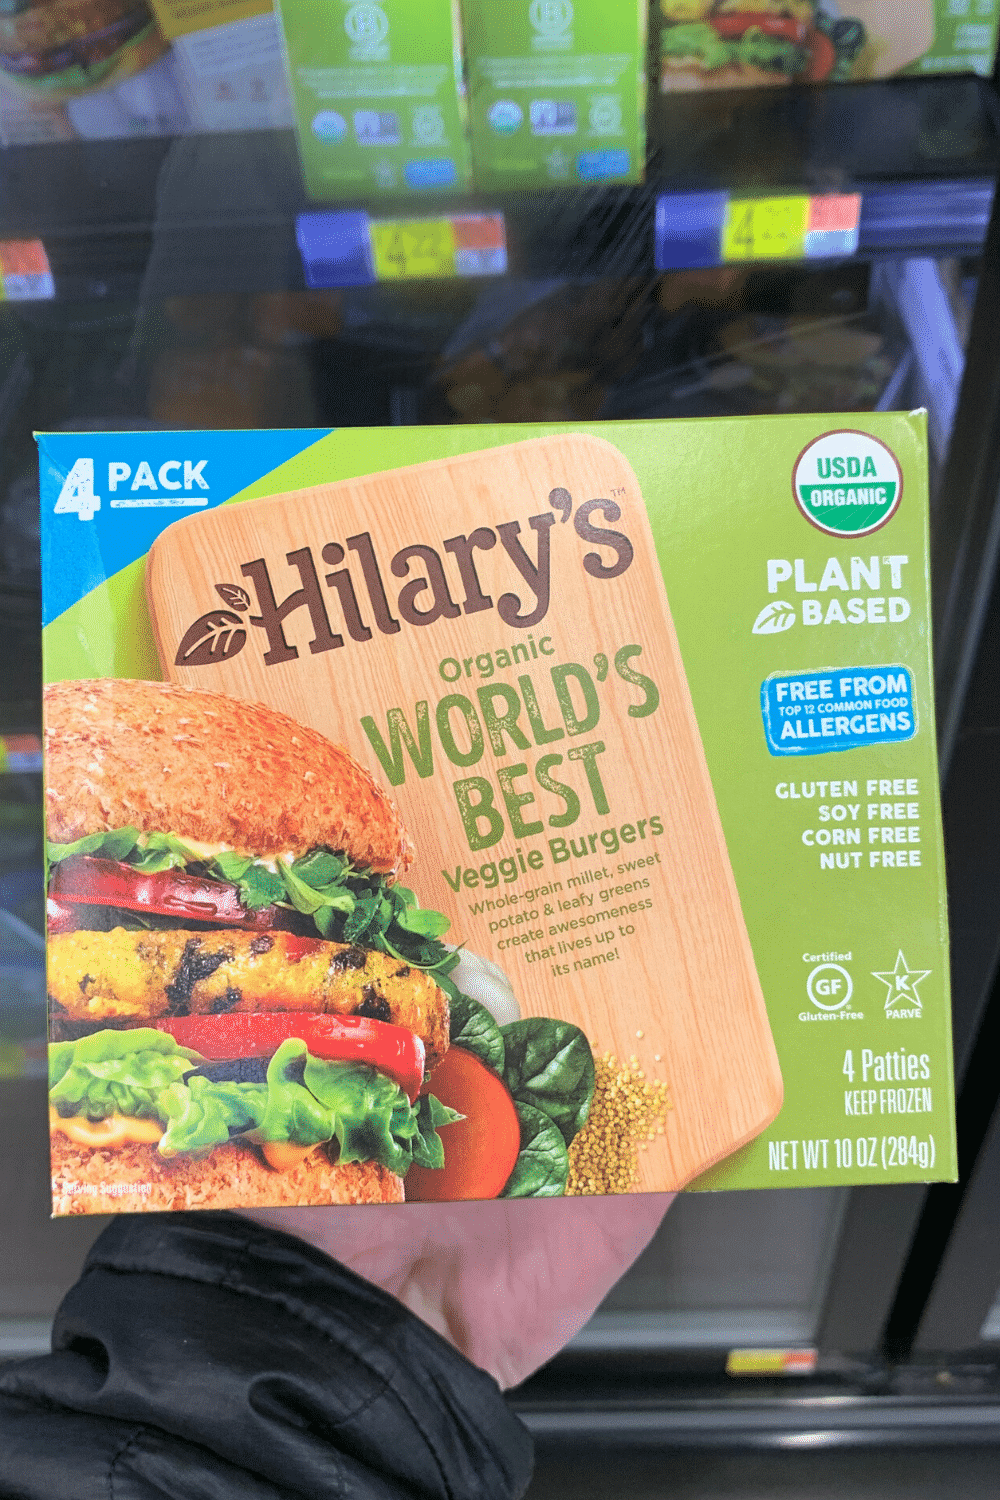 A hand holding Hillary's worlds best plant-based veggie burgers.